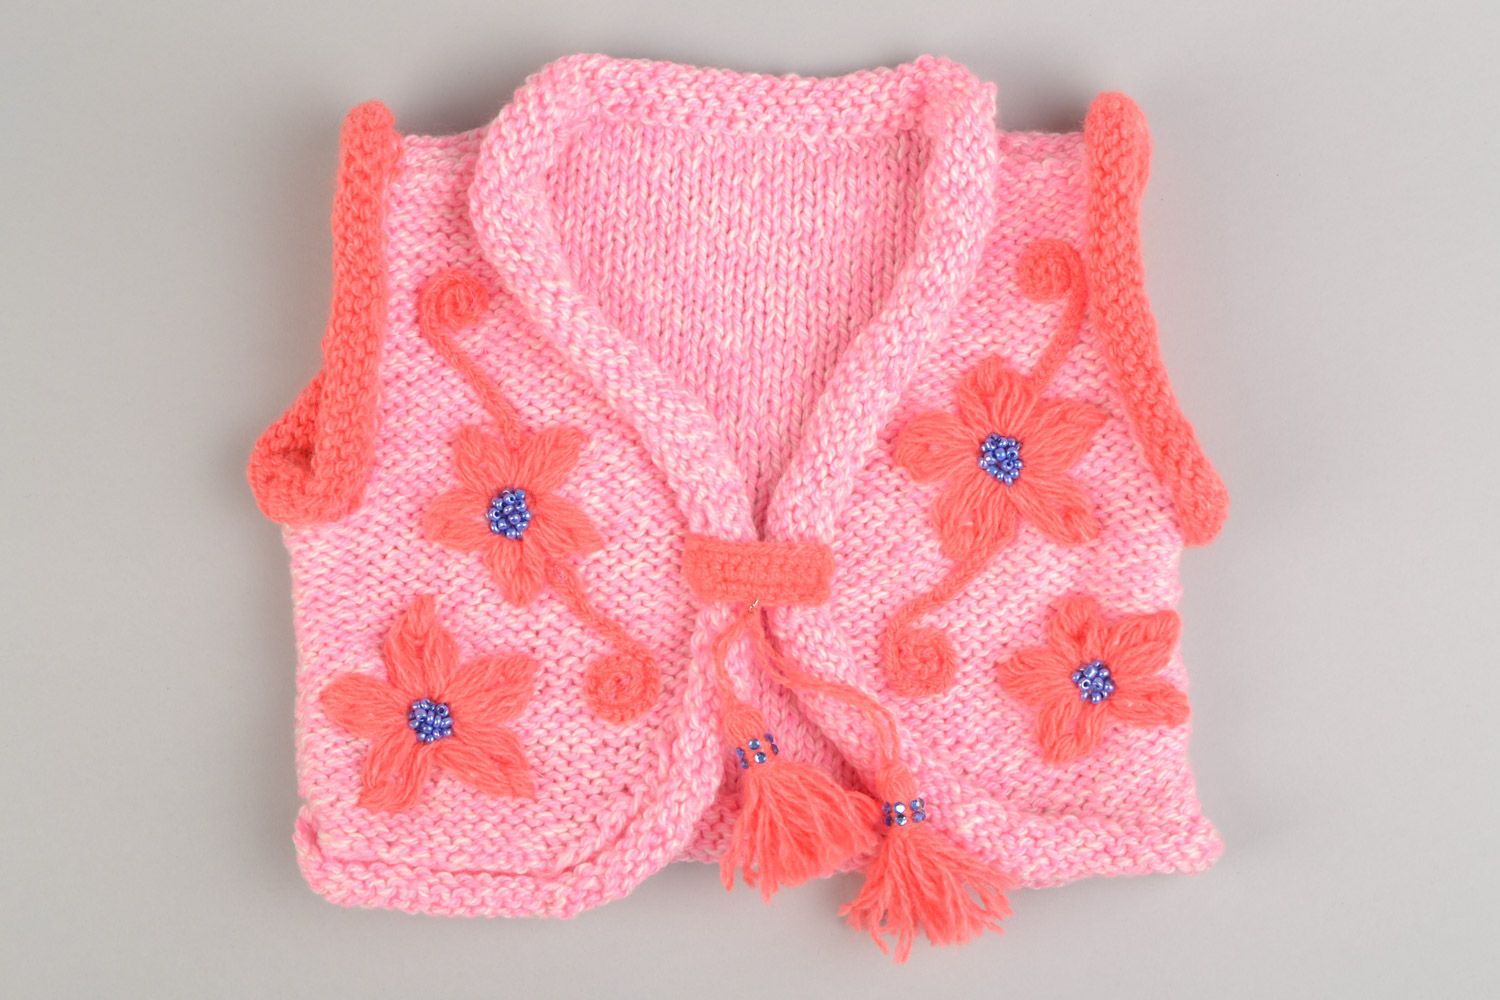 Handmade knitted vest for baby in pink color made of acrylic yarns with tassels photo 1